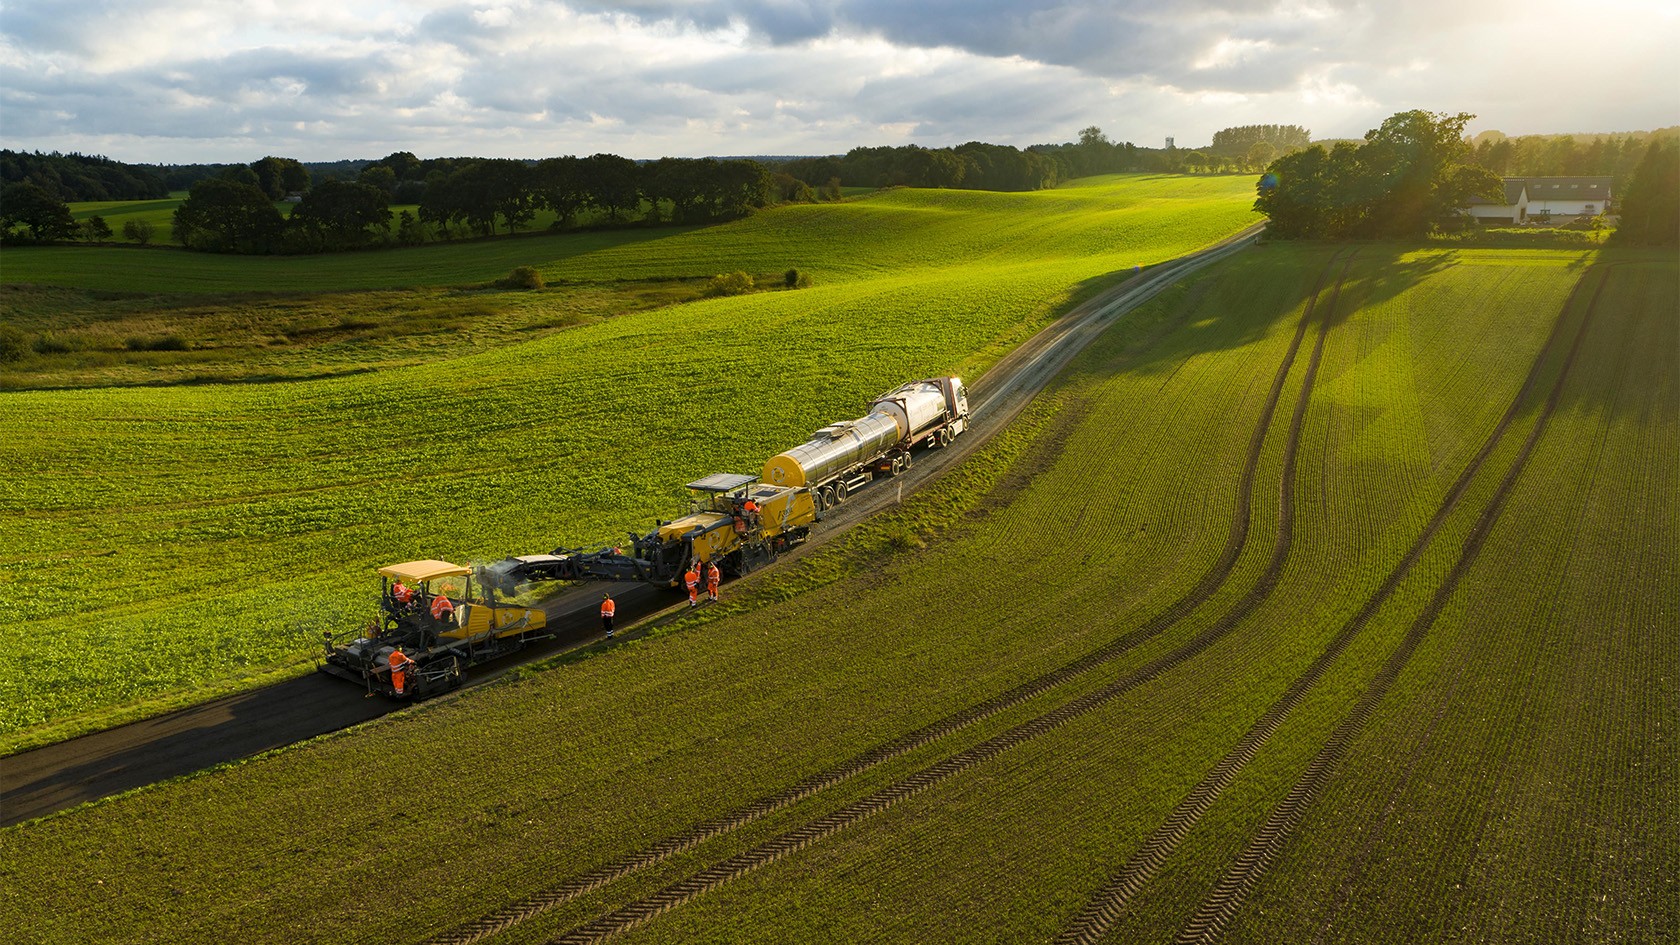 The cold recycling train of the Wirtgen production system centred on the W 380 CRi rehabilitated and widened the Sinding Hedevej in a single pass near the town of Silkeborg/Denmark